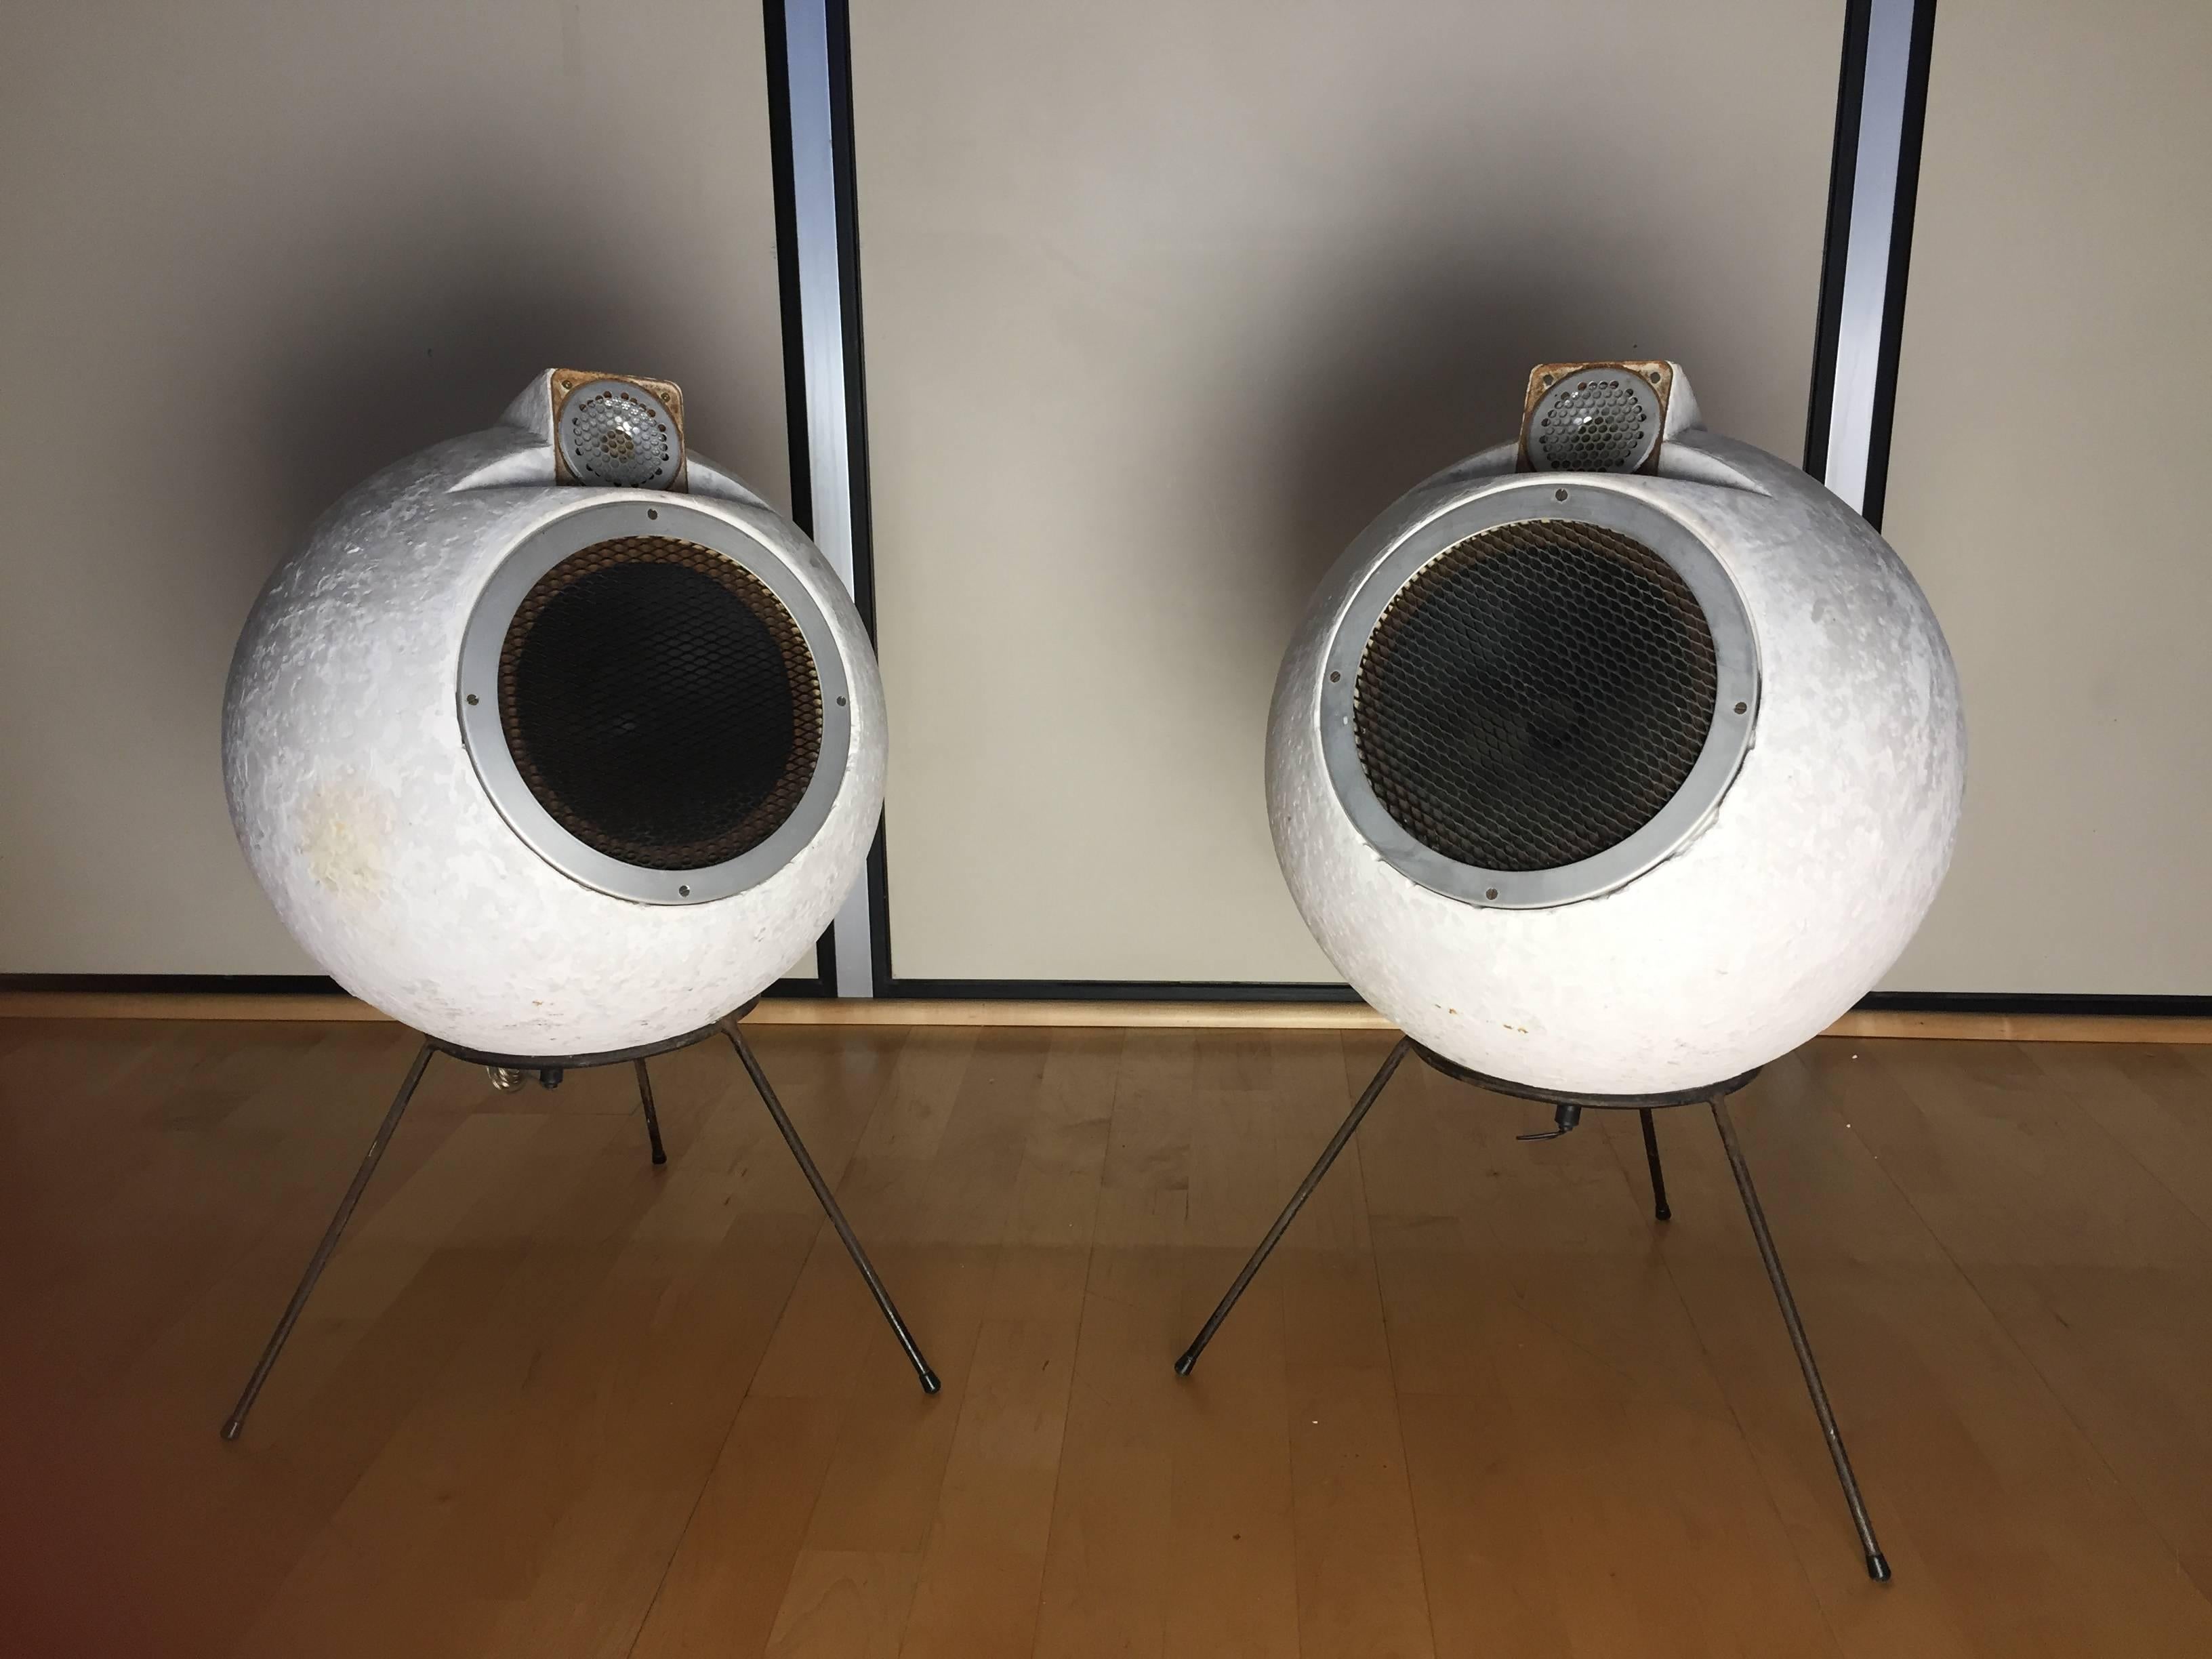 Incredible and really rare pair of Elispon speakers. It has been tested and it works really well. The pugling system has to be redone to adapt it to your own devices.